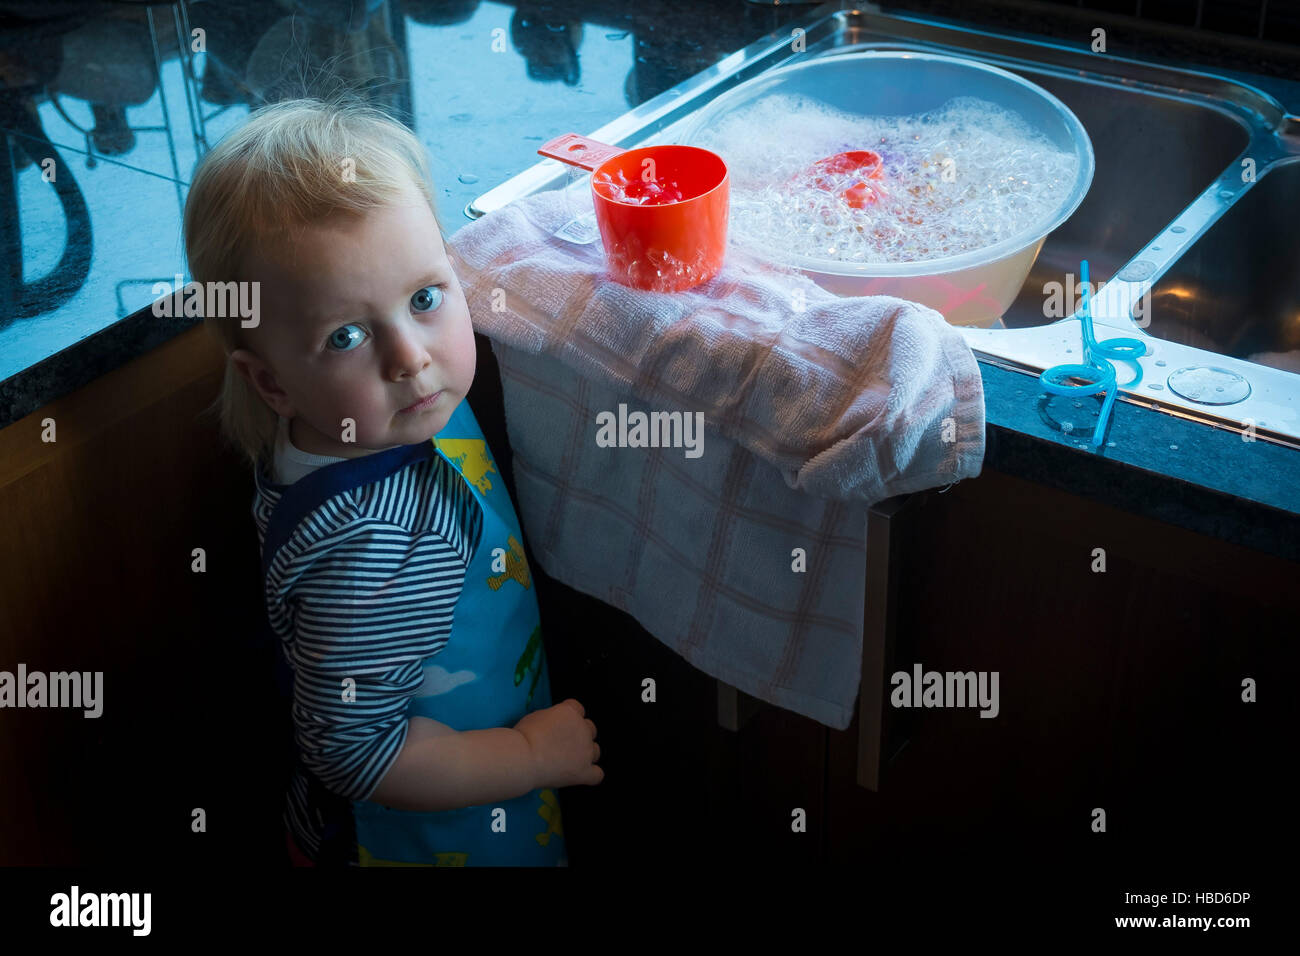 A toddler looking concerned as she plays with bubbles and water. Stock Photo